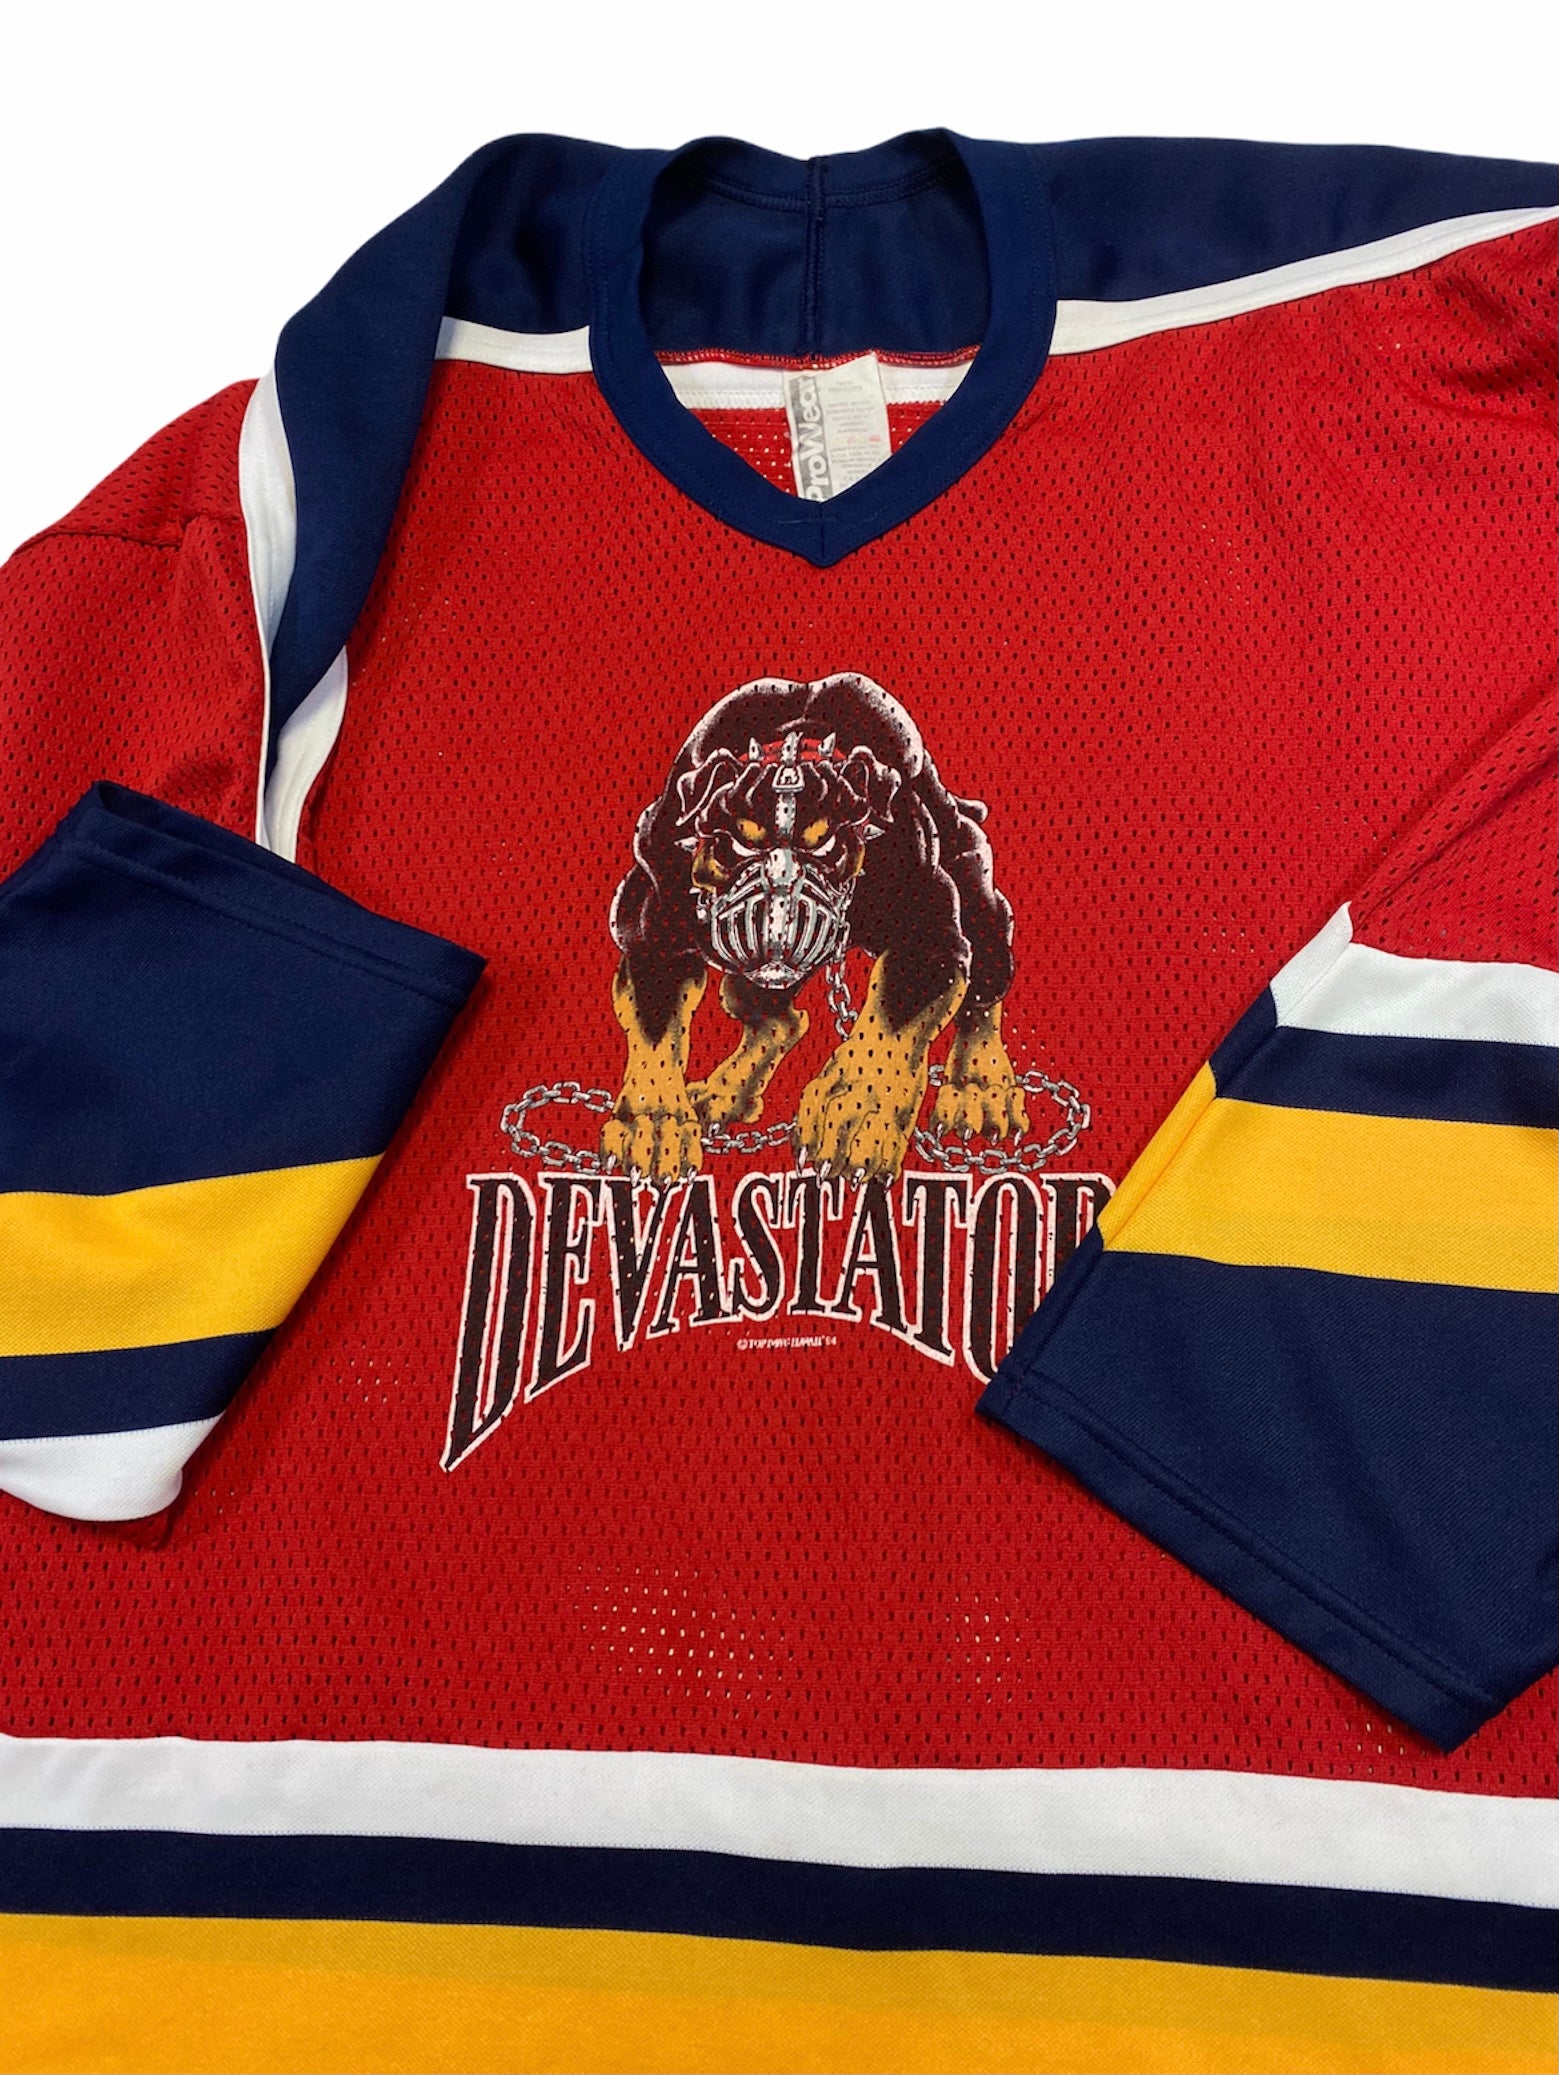 Five of the best old hockey sweaters